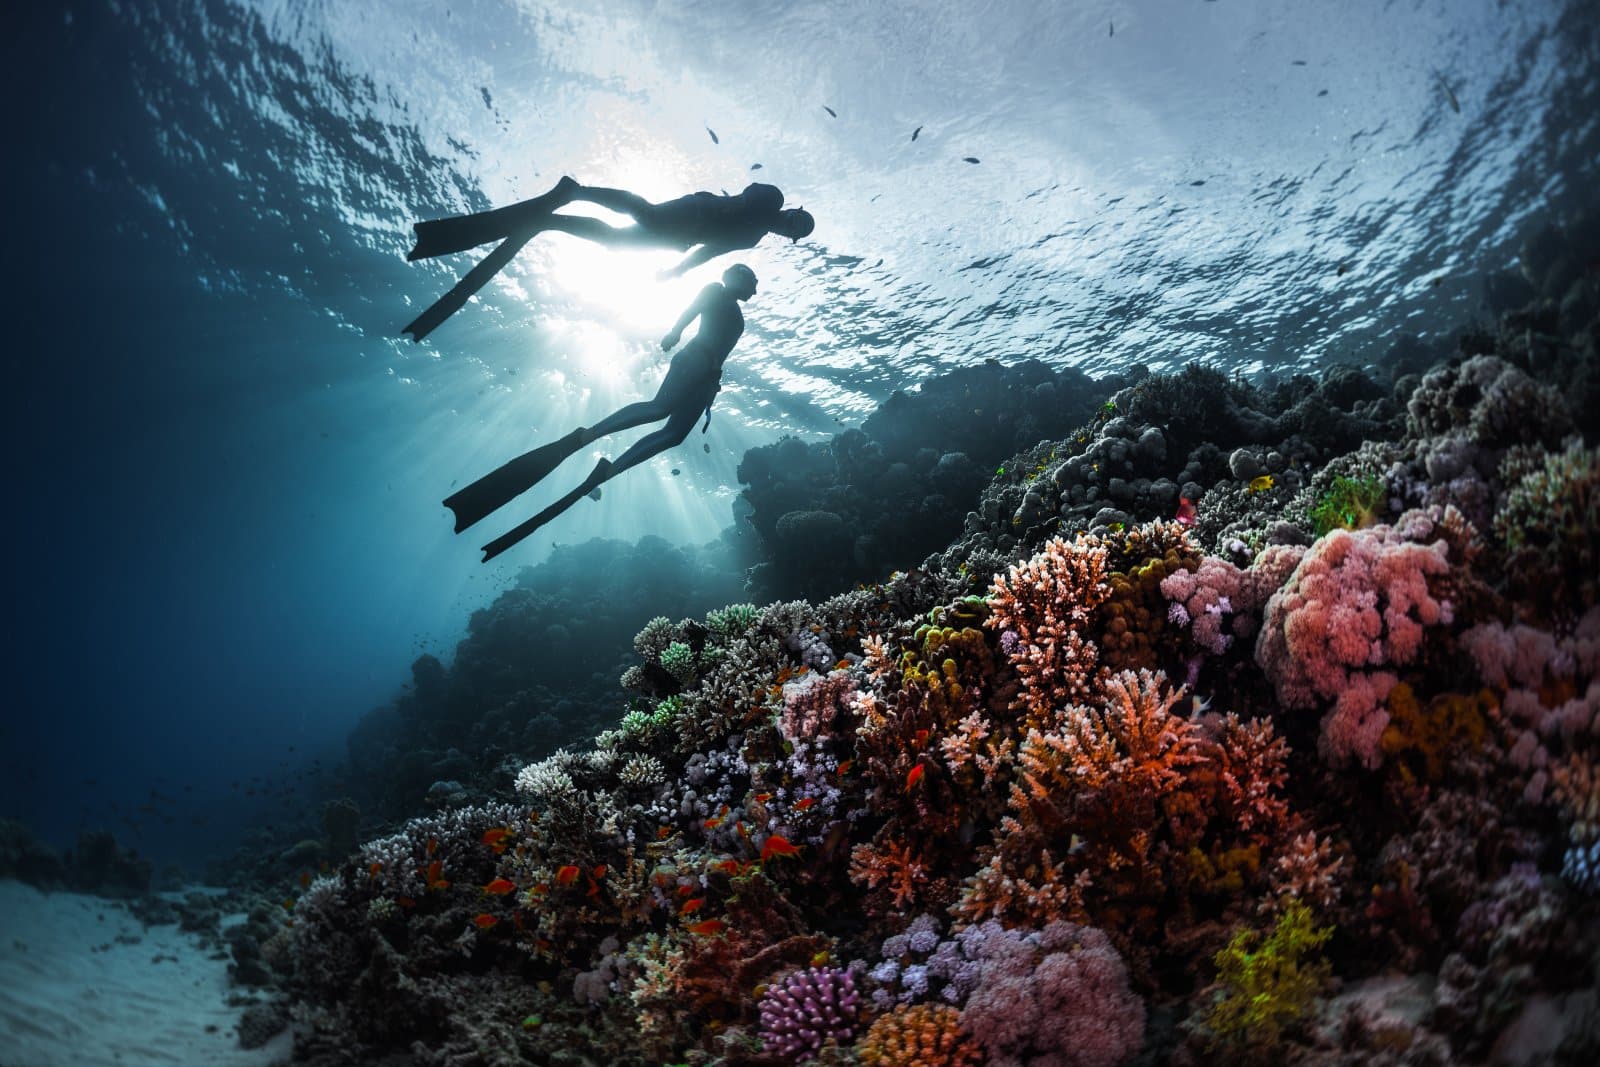 <p class="wp-caption-text">Image Credit: Shutterstock / Dudarev Mikhail</p>  <p><span>Water-based activities, when conducted responsibly, can be both enjoyable and educational. Coral reef-safe diving, snorkeling with eco-conscious operators, and participating in marine conservation workshops teach families about marine biodiversity and the importance of protecting our oceans.</span></p> <p><b>Insider’s Tip: </b><span>Ensure that any tour operator or activity provider follows environmentally responsible practices and offers educational content about marine conservation.</span></p>